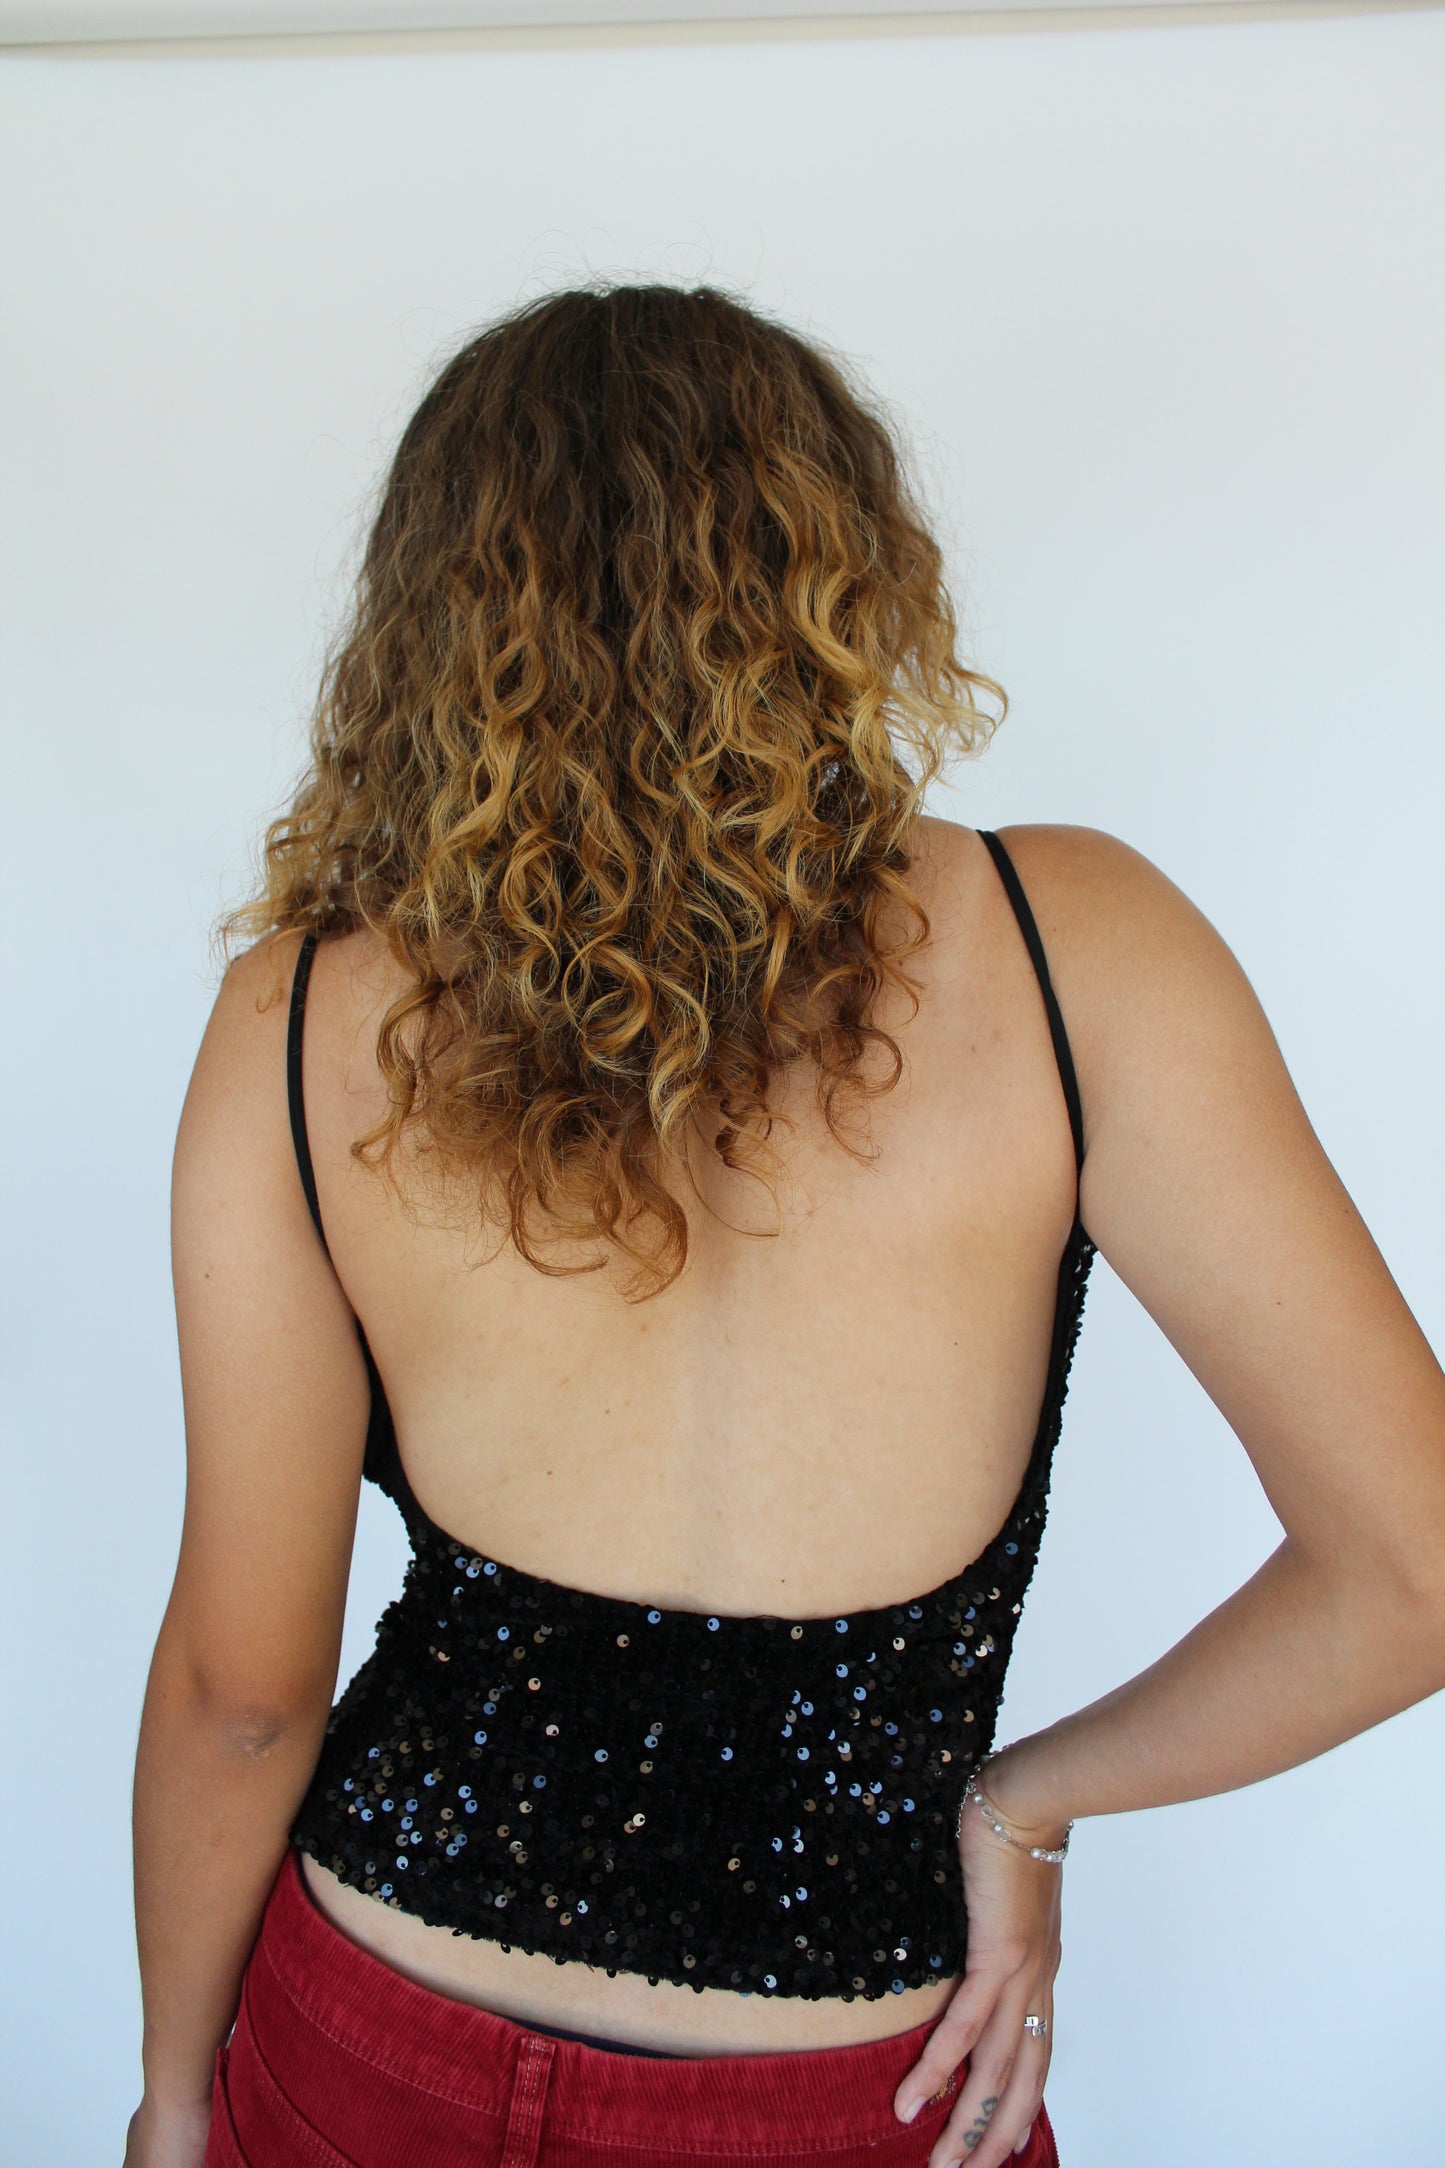 Black Sequin Backless Tank Top- S